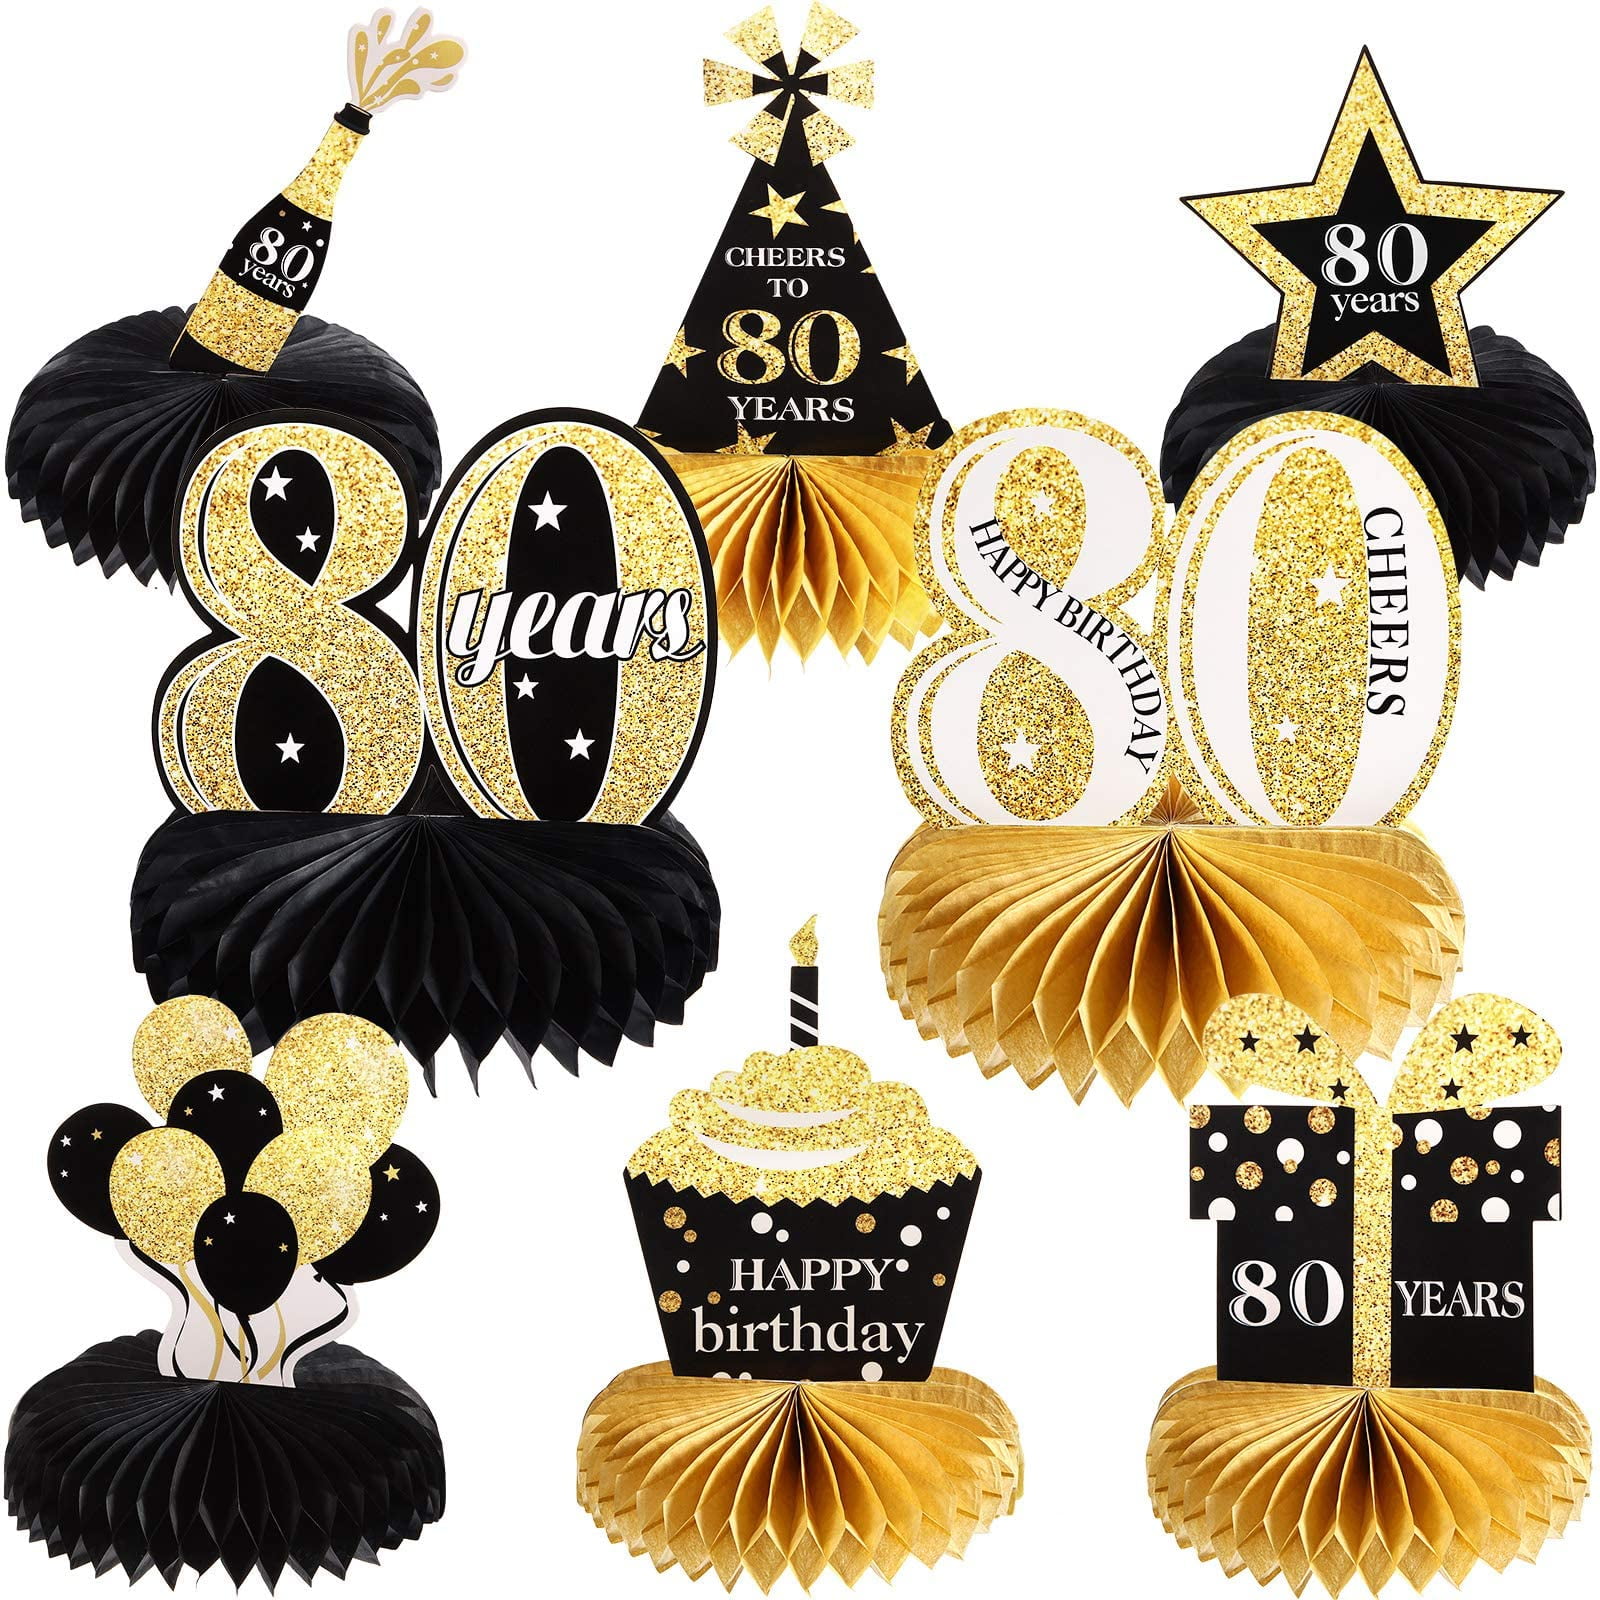 8 Pieces Happy Birthday Party Decorations Supplies Birthday Honeycomb Centerpieces Birthday Table Toppers for Birthday Party Favor Photo Booth Props Black and Gold